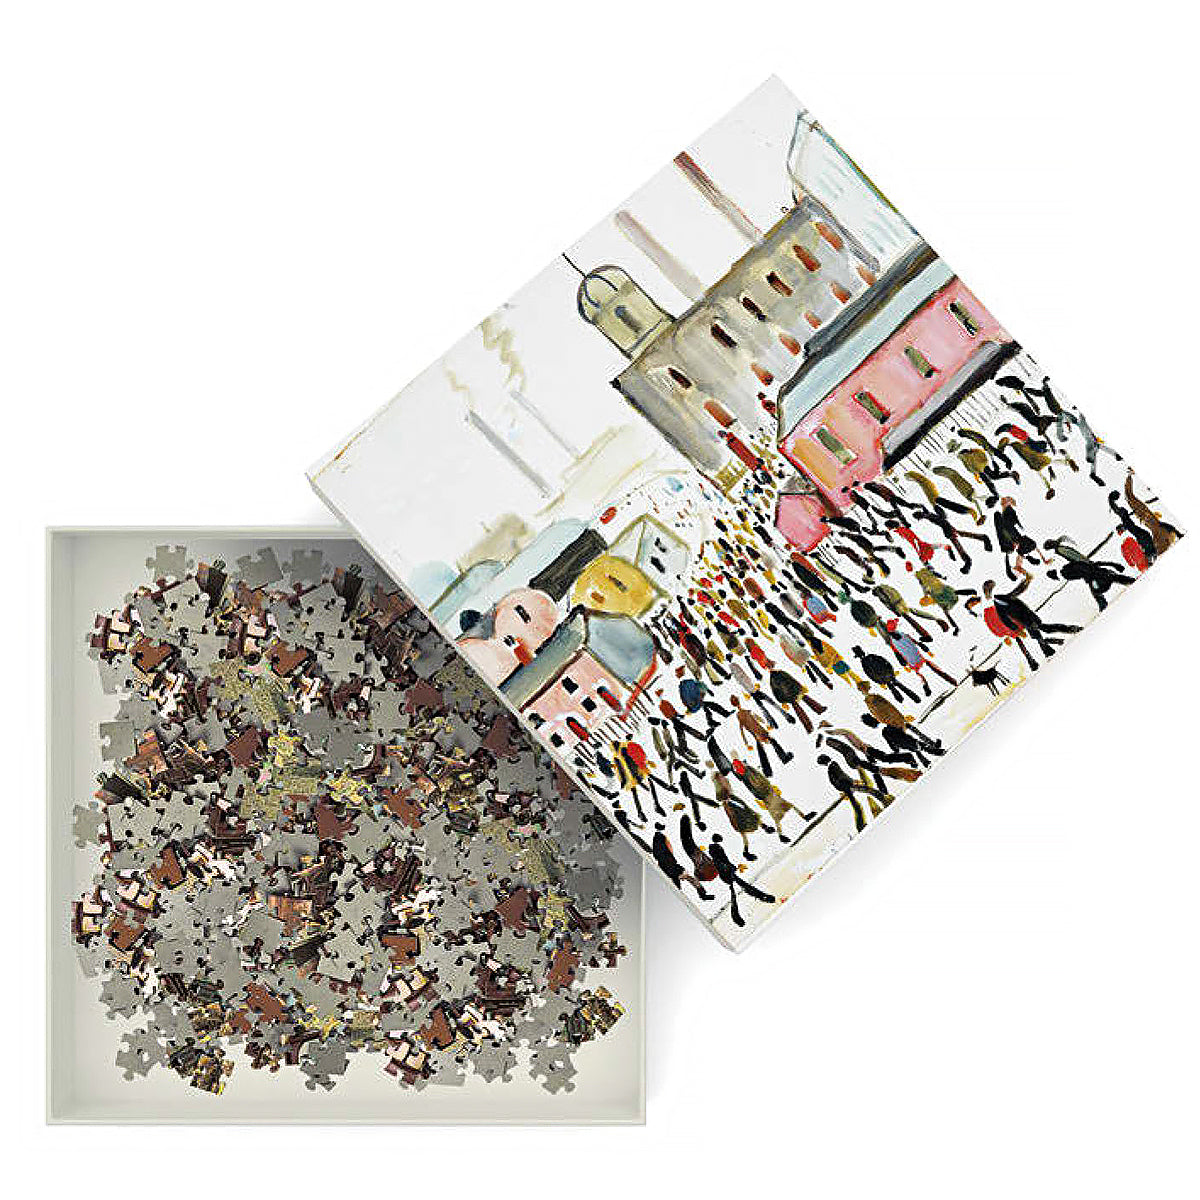 The 1000-piece L. S. Lowry 'Going To Work' jigsaw puzzle is the best art activity to zone out at the end of a long day.